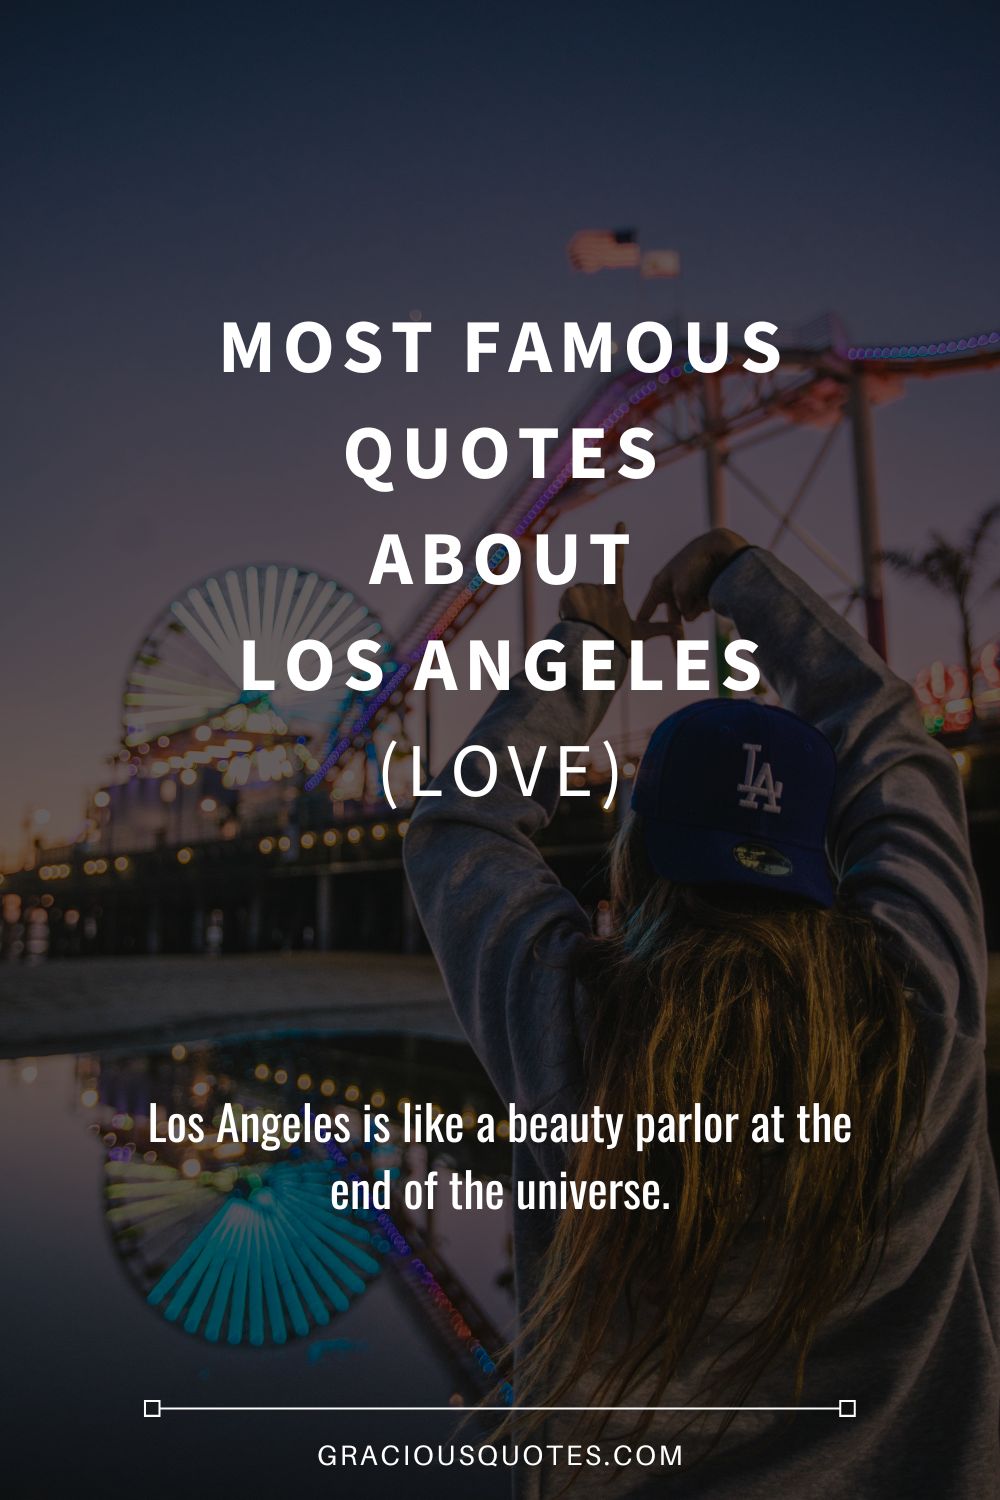 Most Famous Quotes About Los Angeles (LOVE) - Gracious Quotes